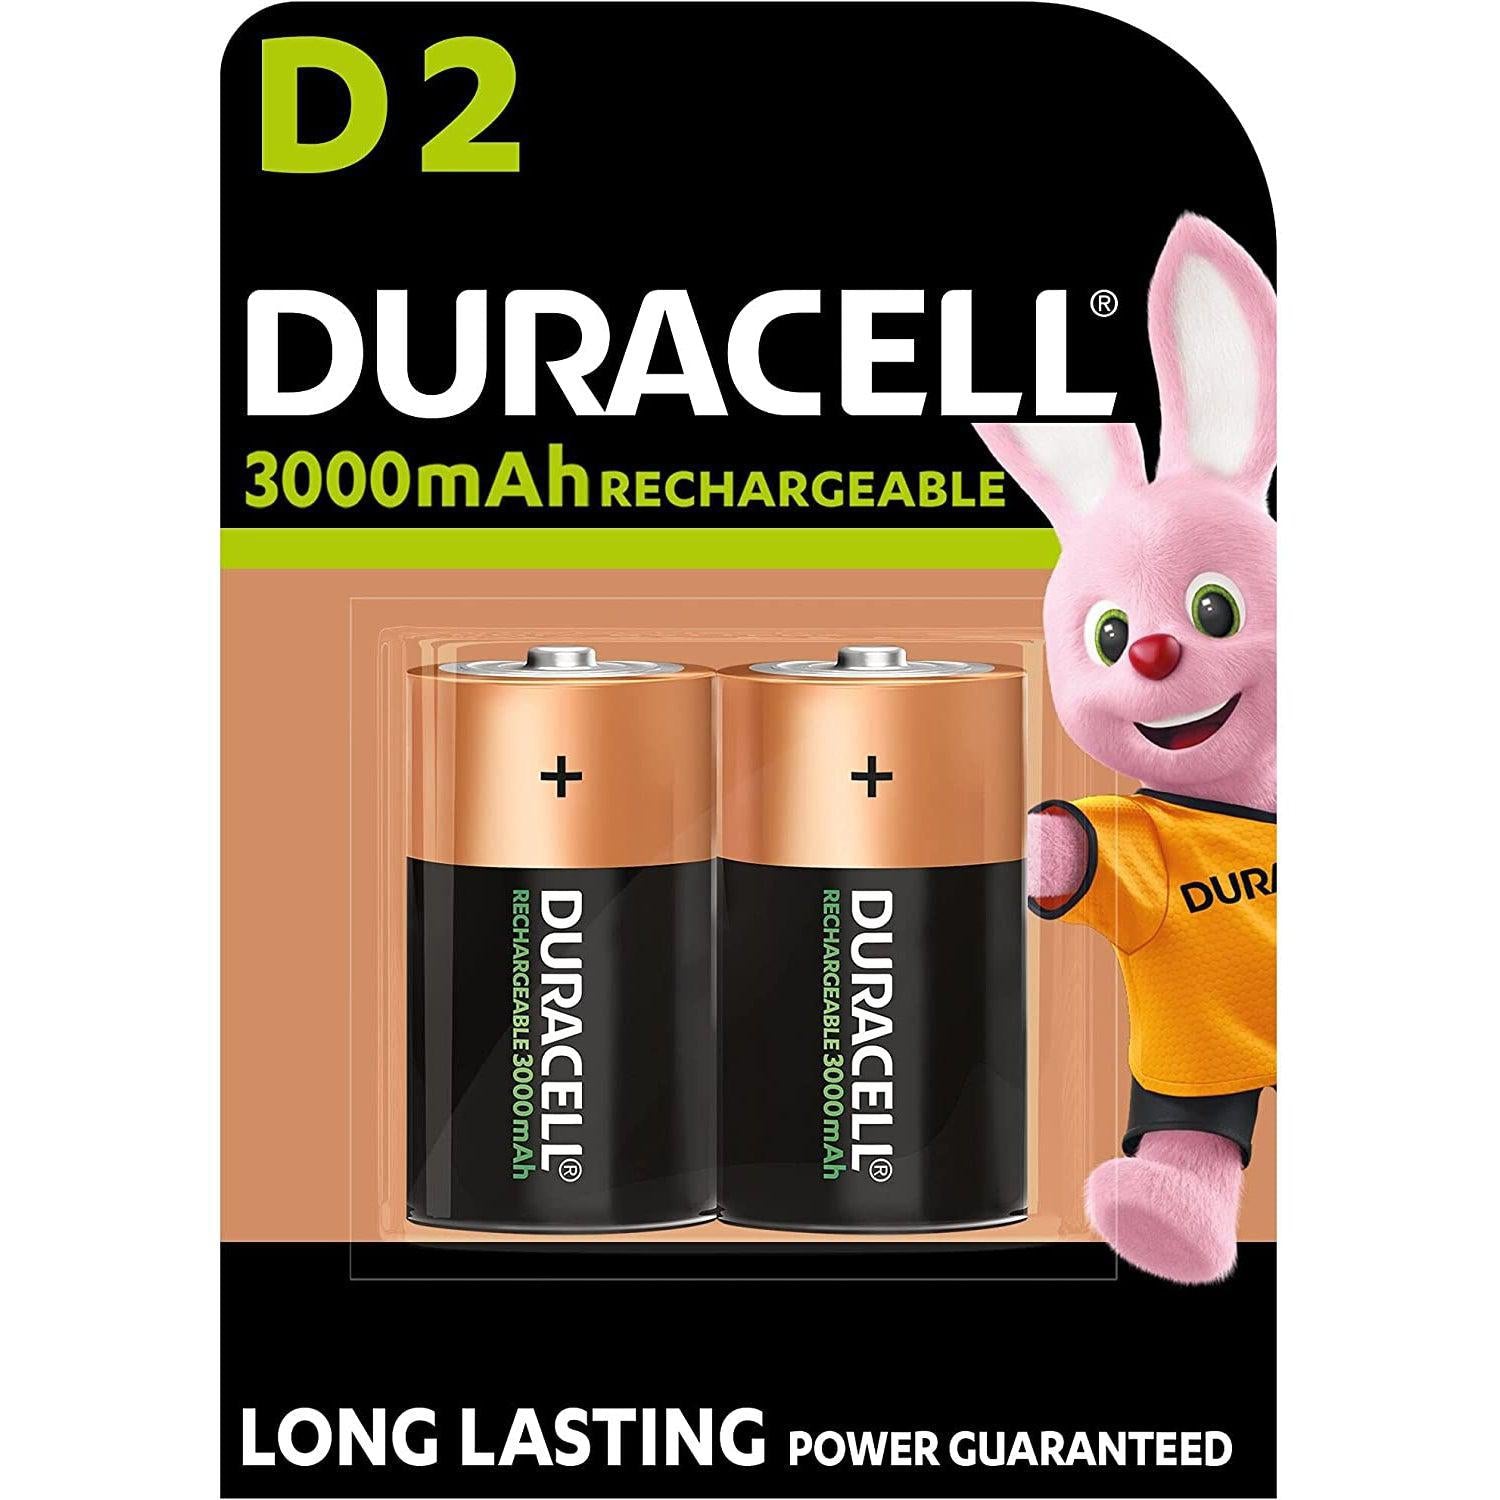 Duracell Rechargeable D 3000 mAh Batteries, pack of 2 - Healthxpress.ie